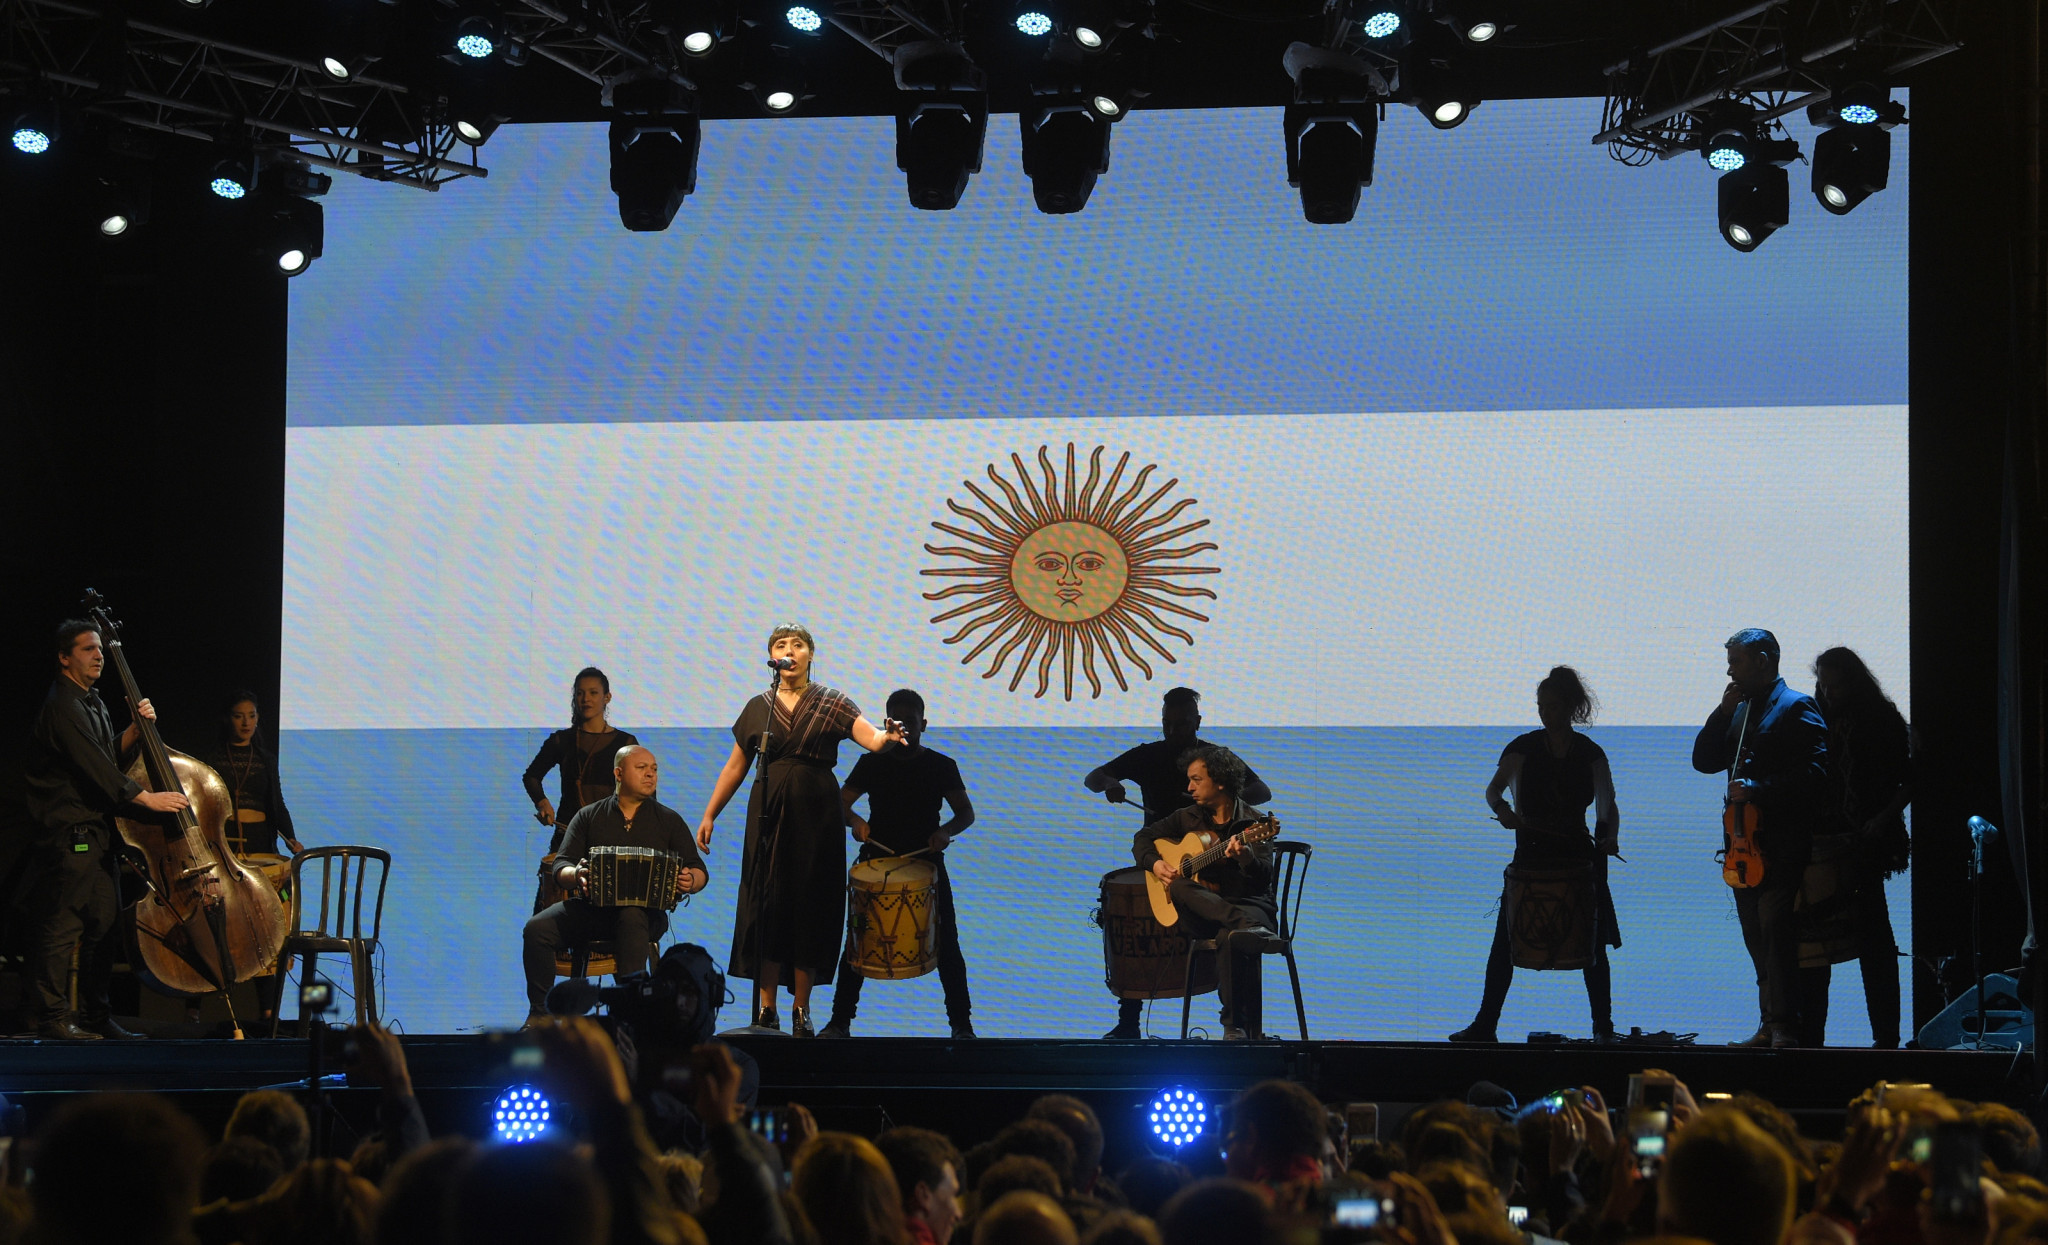 Argentina's hosting of the Games came to a close with a short Ceremony ©Getty Images